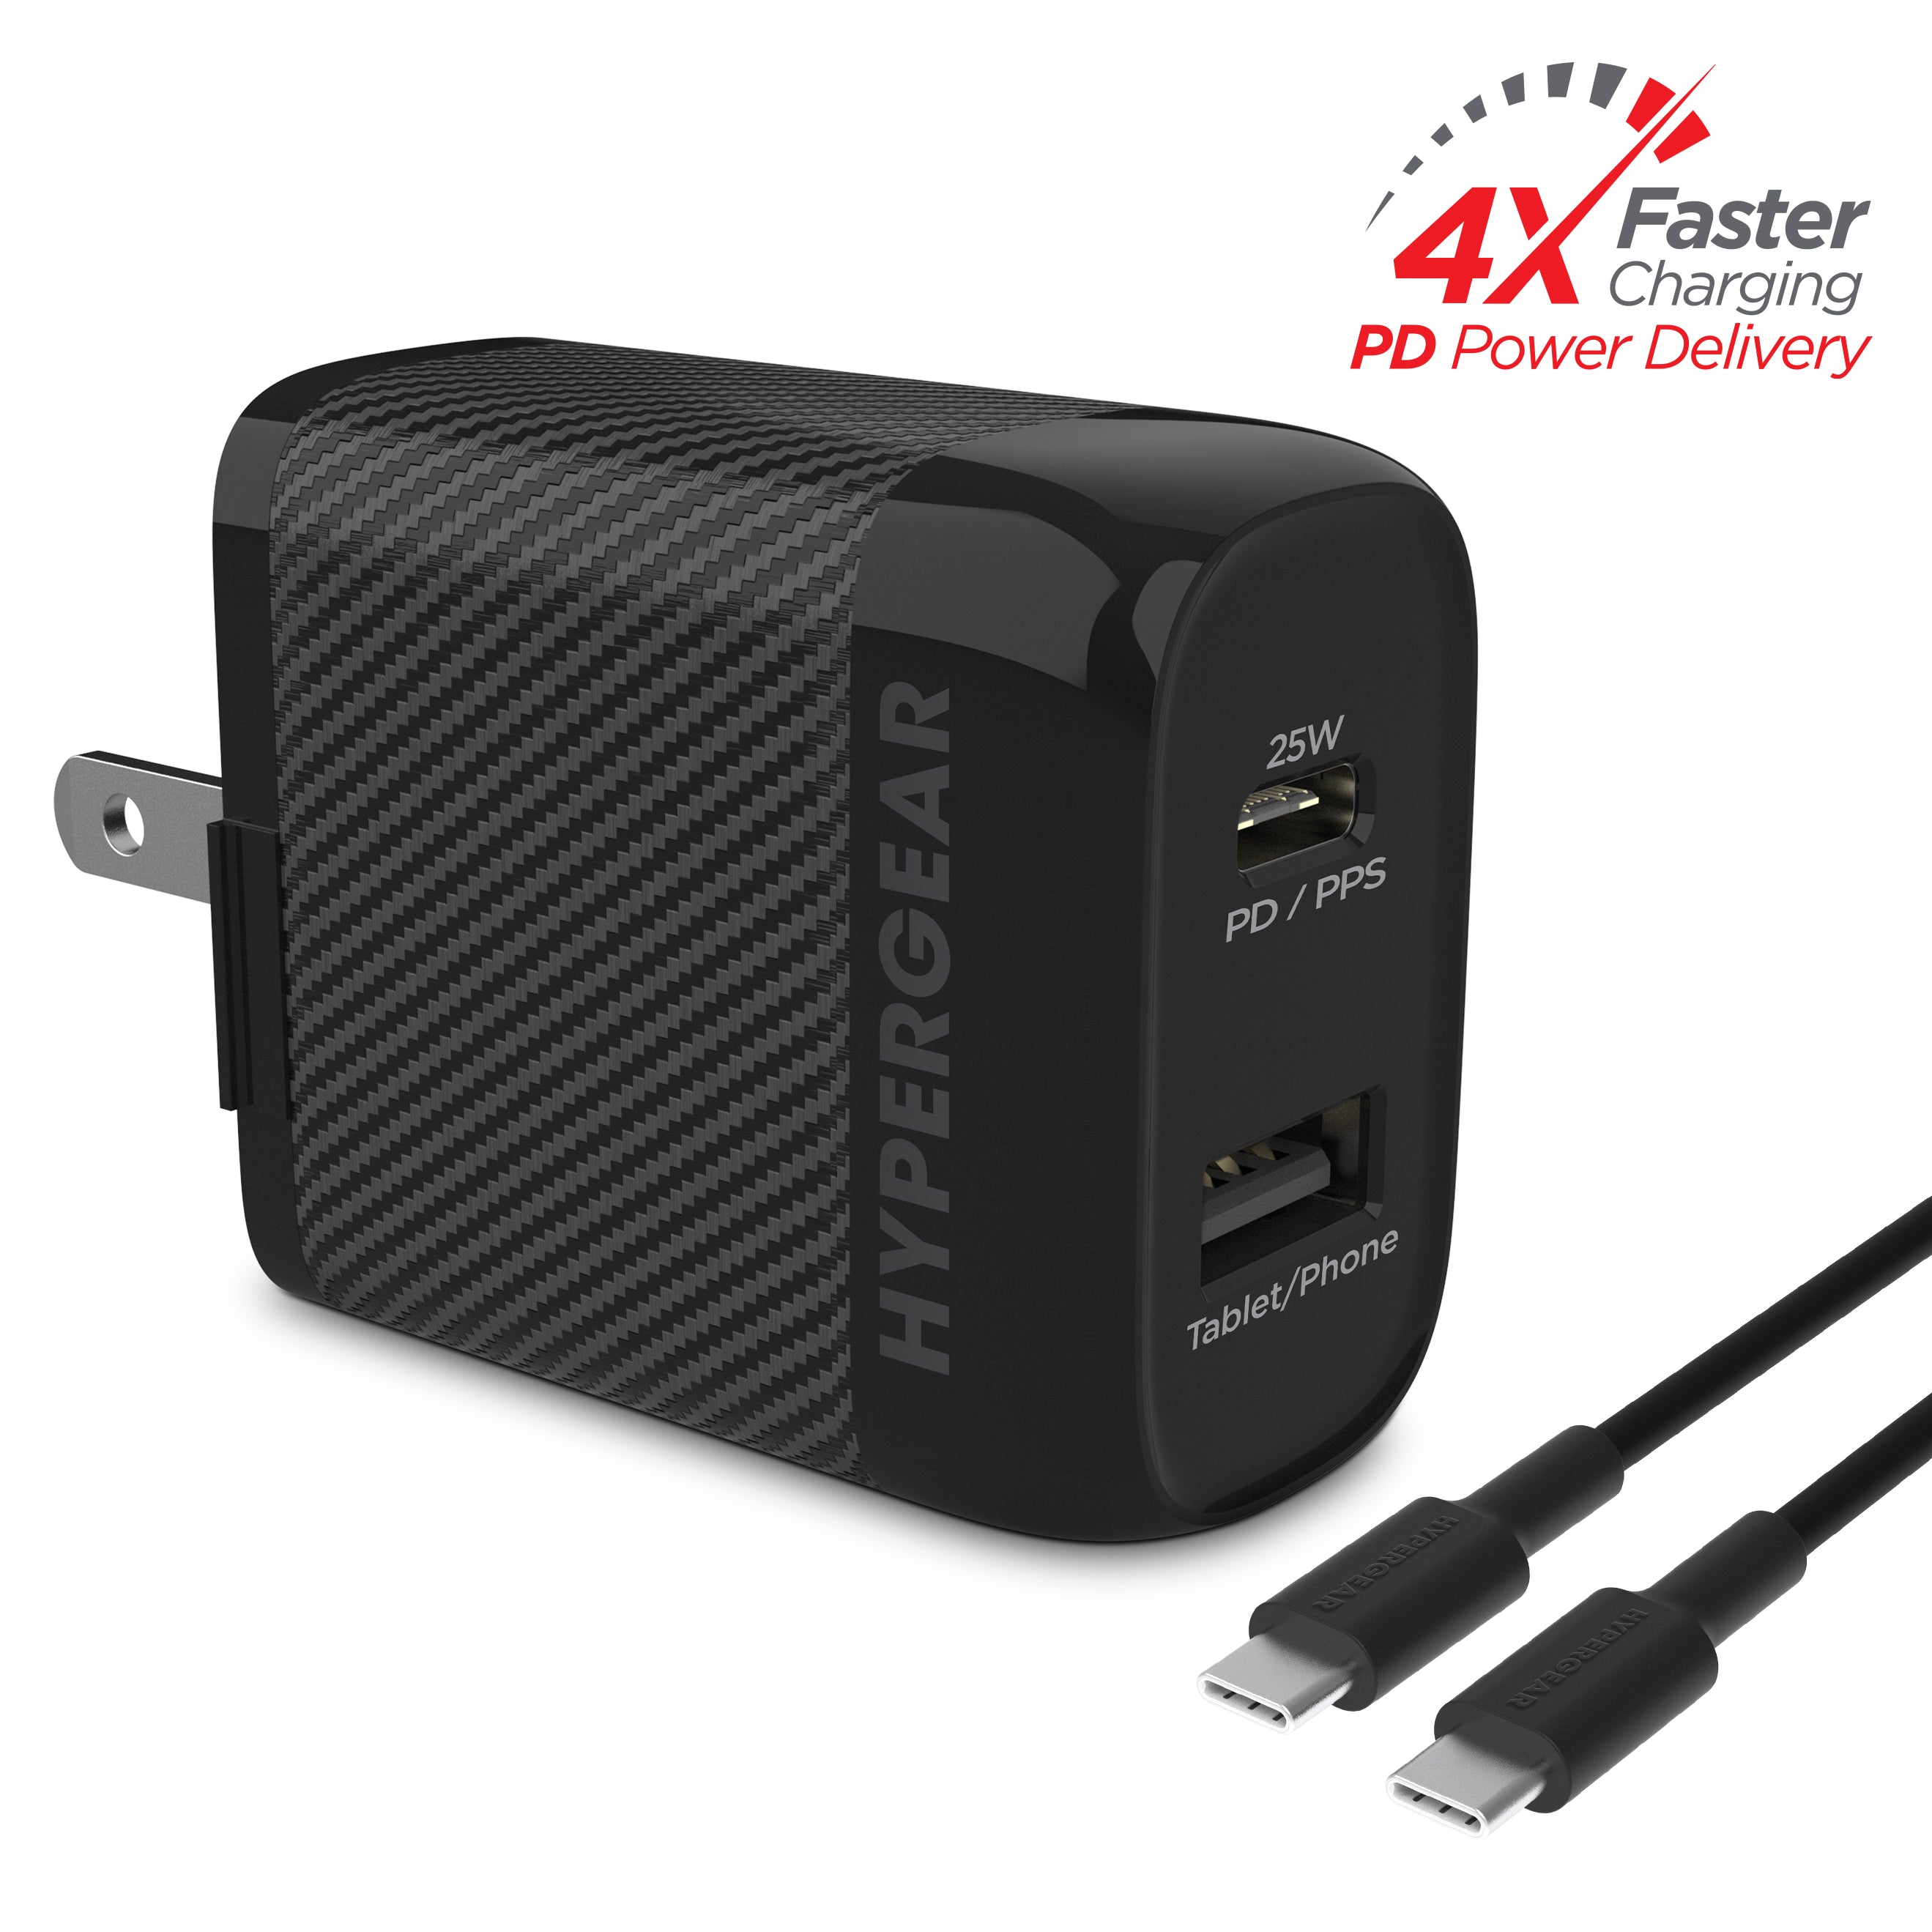 SpeedBoost 25W USB-C & 12W USB Wall Kit with PD/PPS and 6ft USB-C Cable | Black